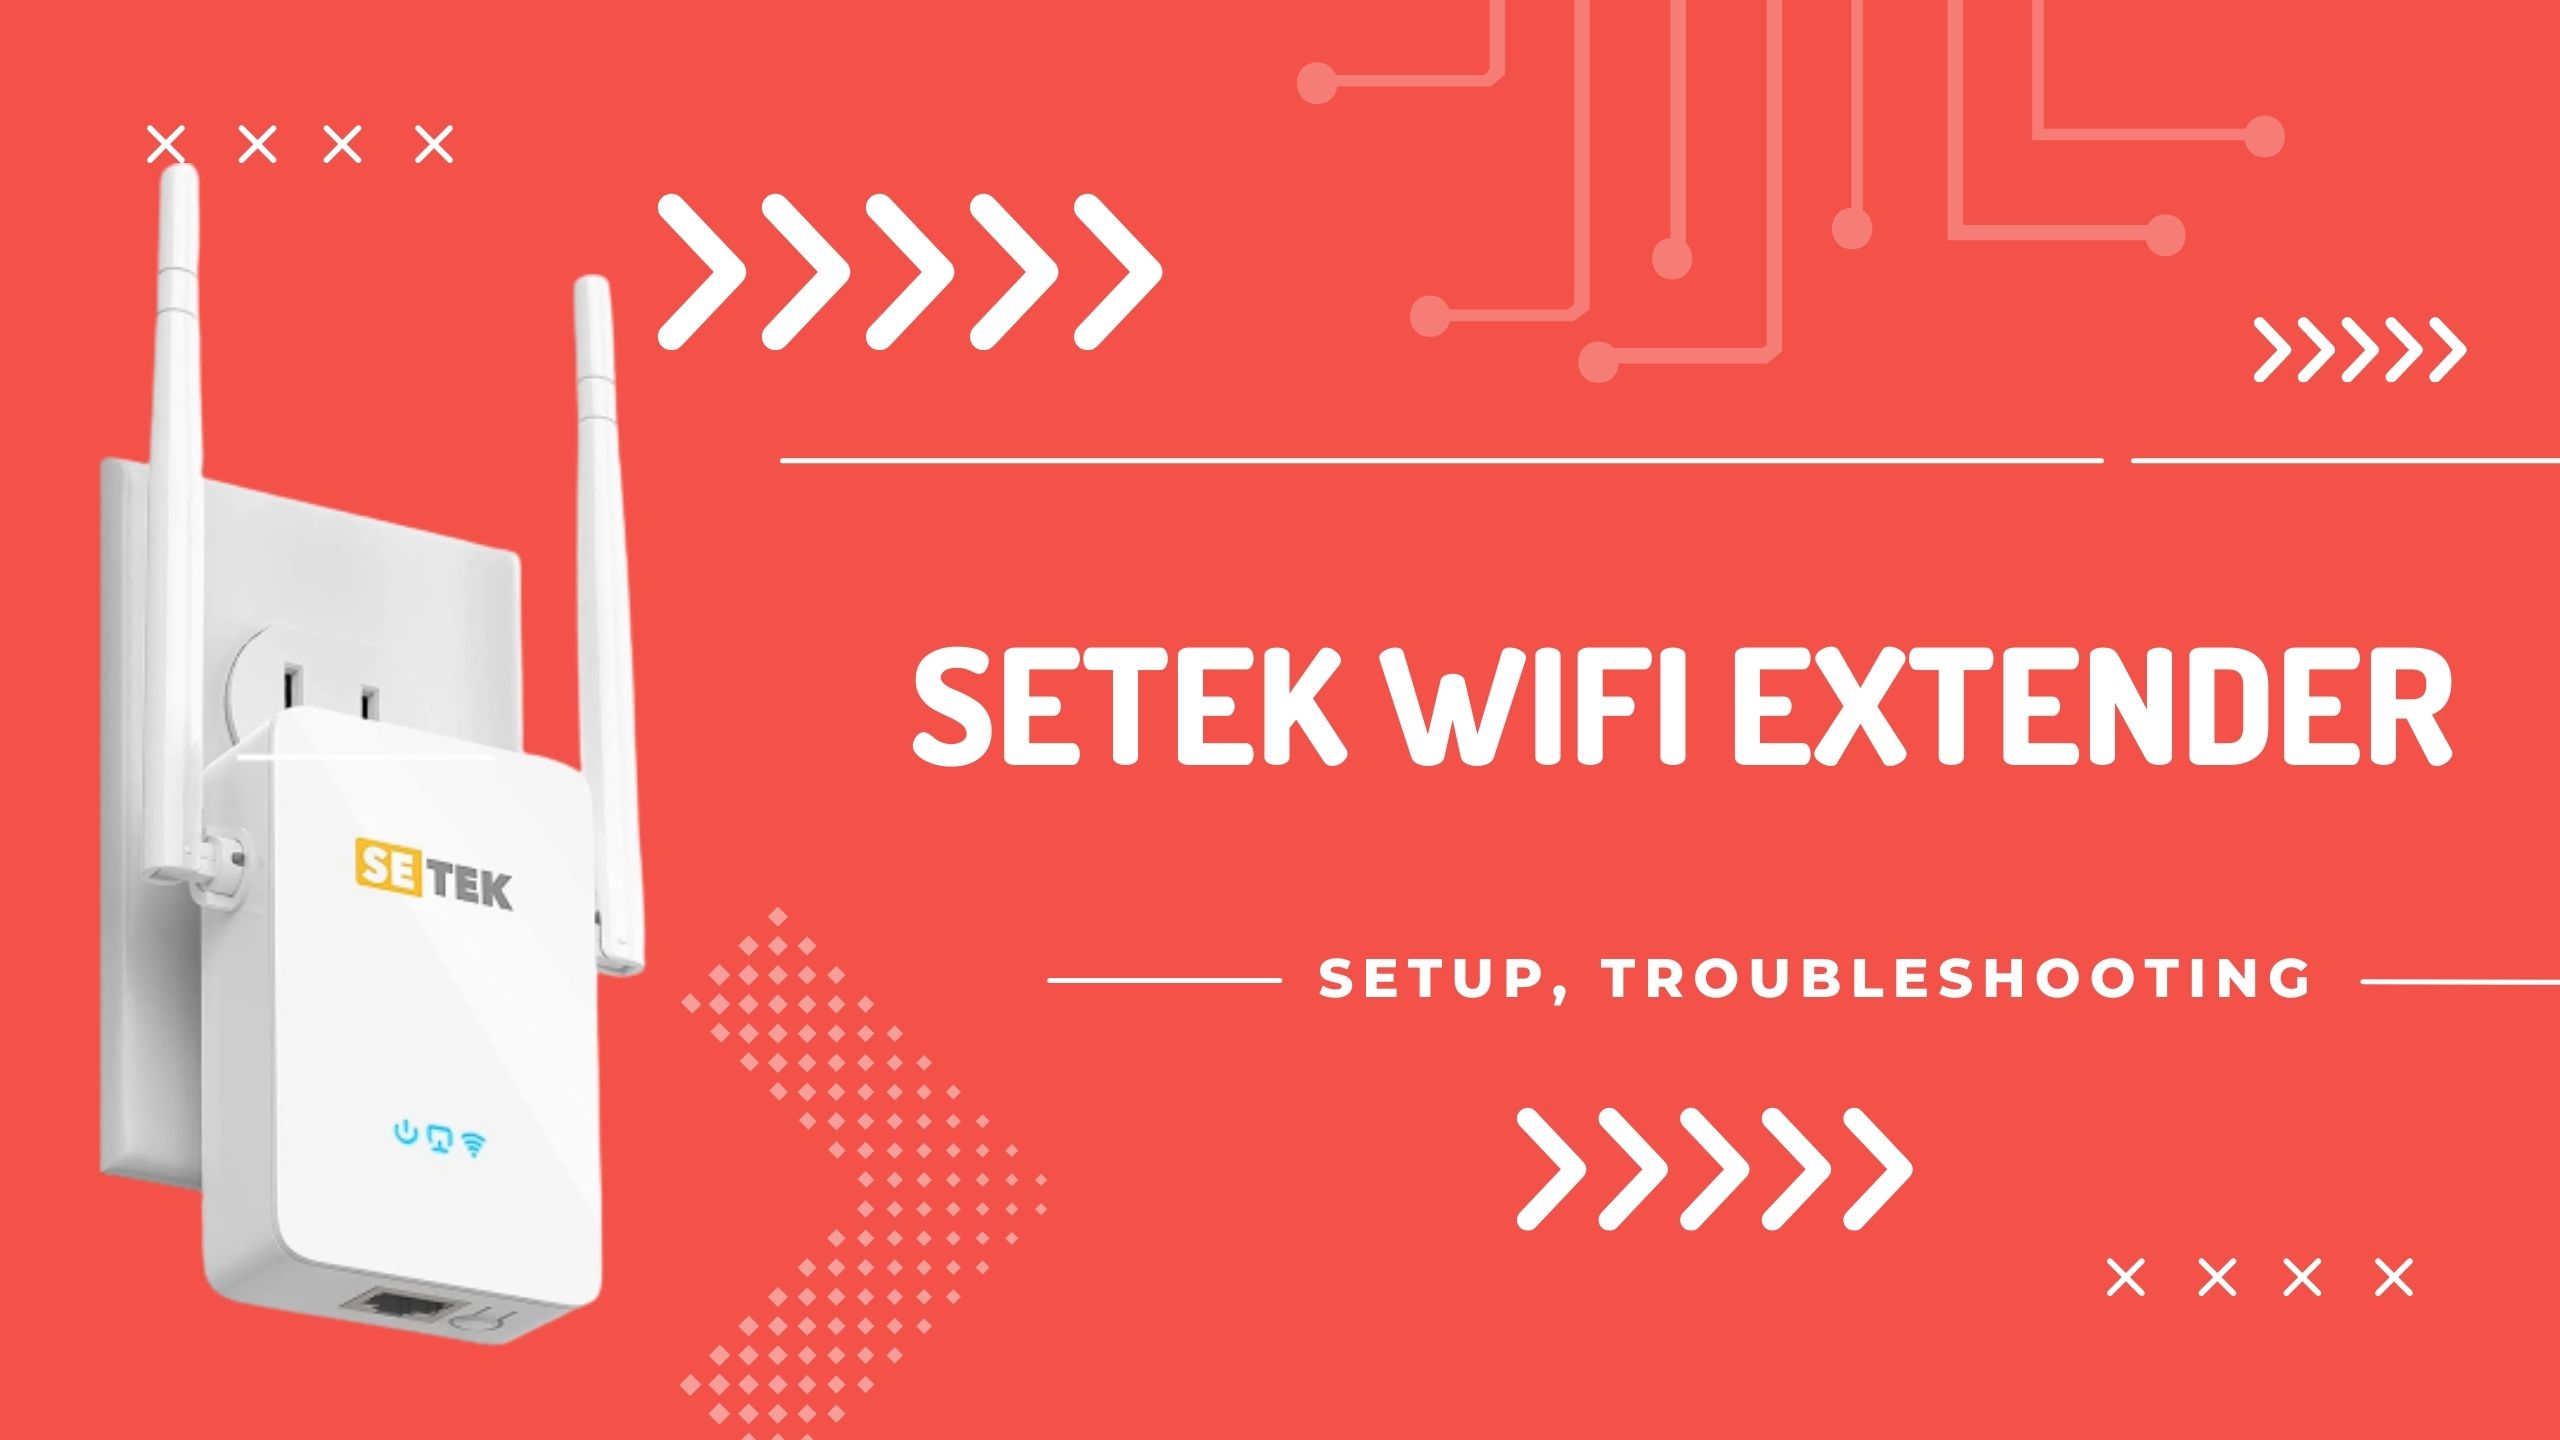 How to Setup and troubleshoot SETEK WIFI Extender?